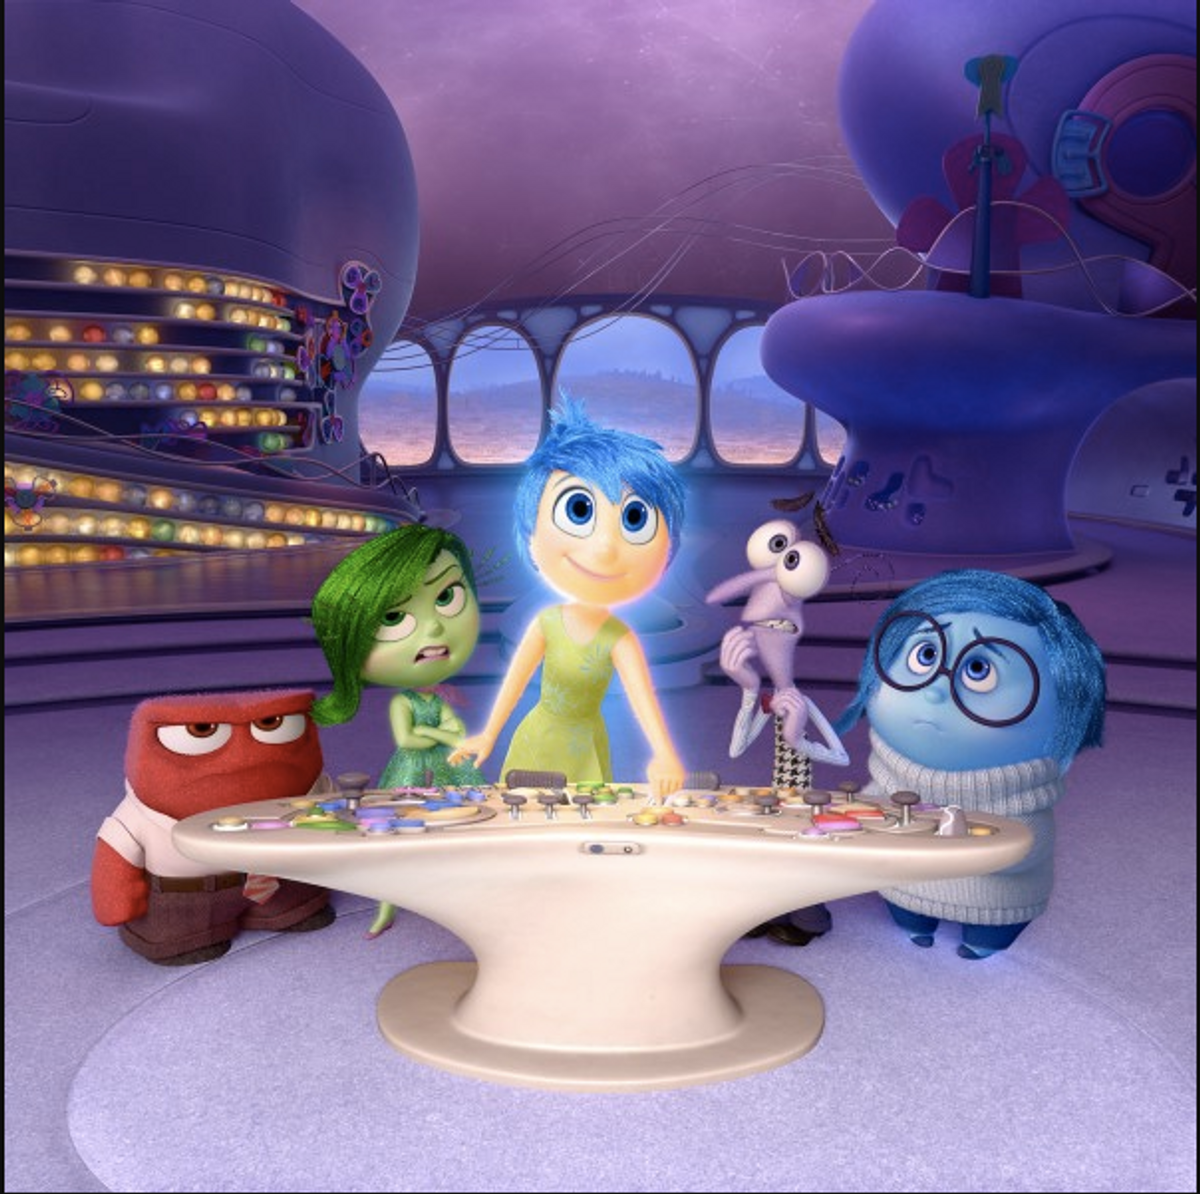 6 Feelings You Have While Putting Your Senior Project Together As Told By Inside Out